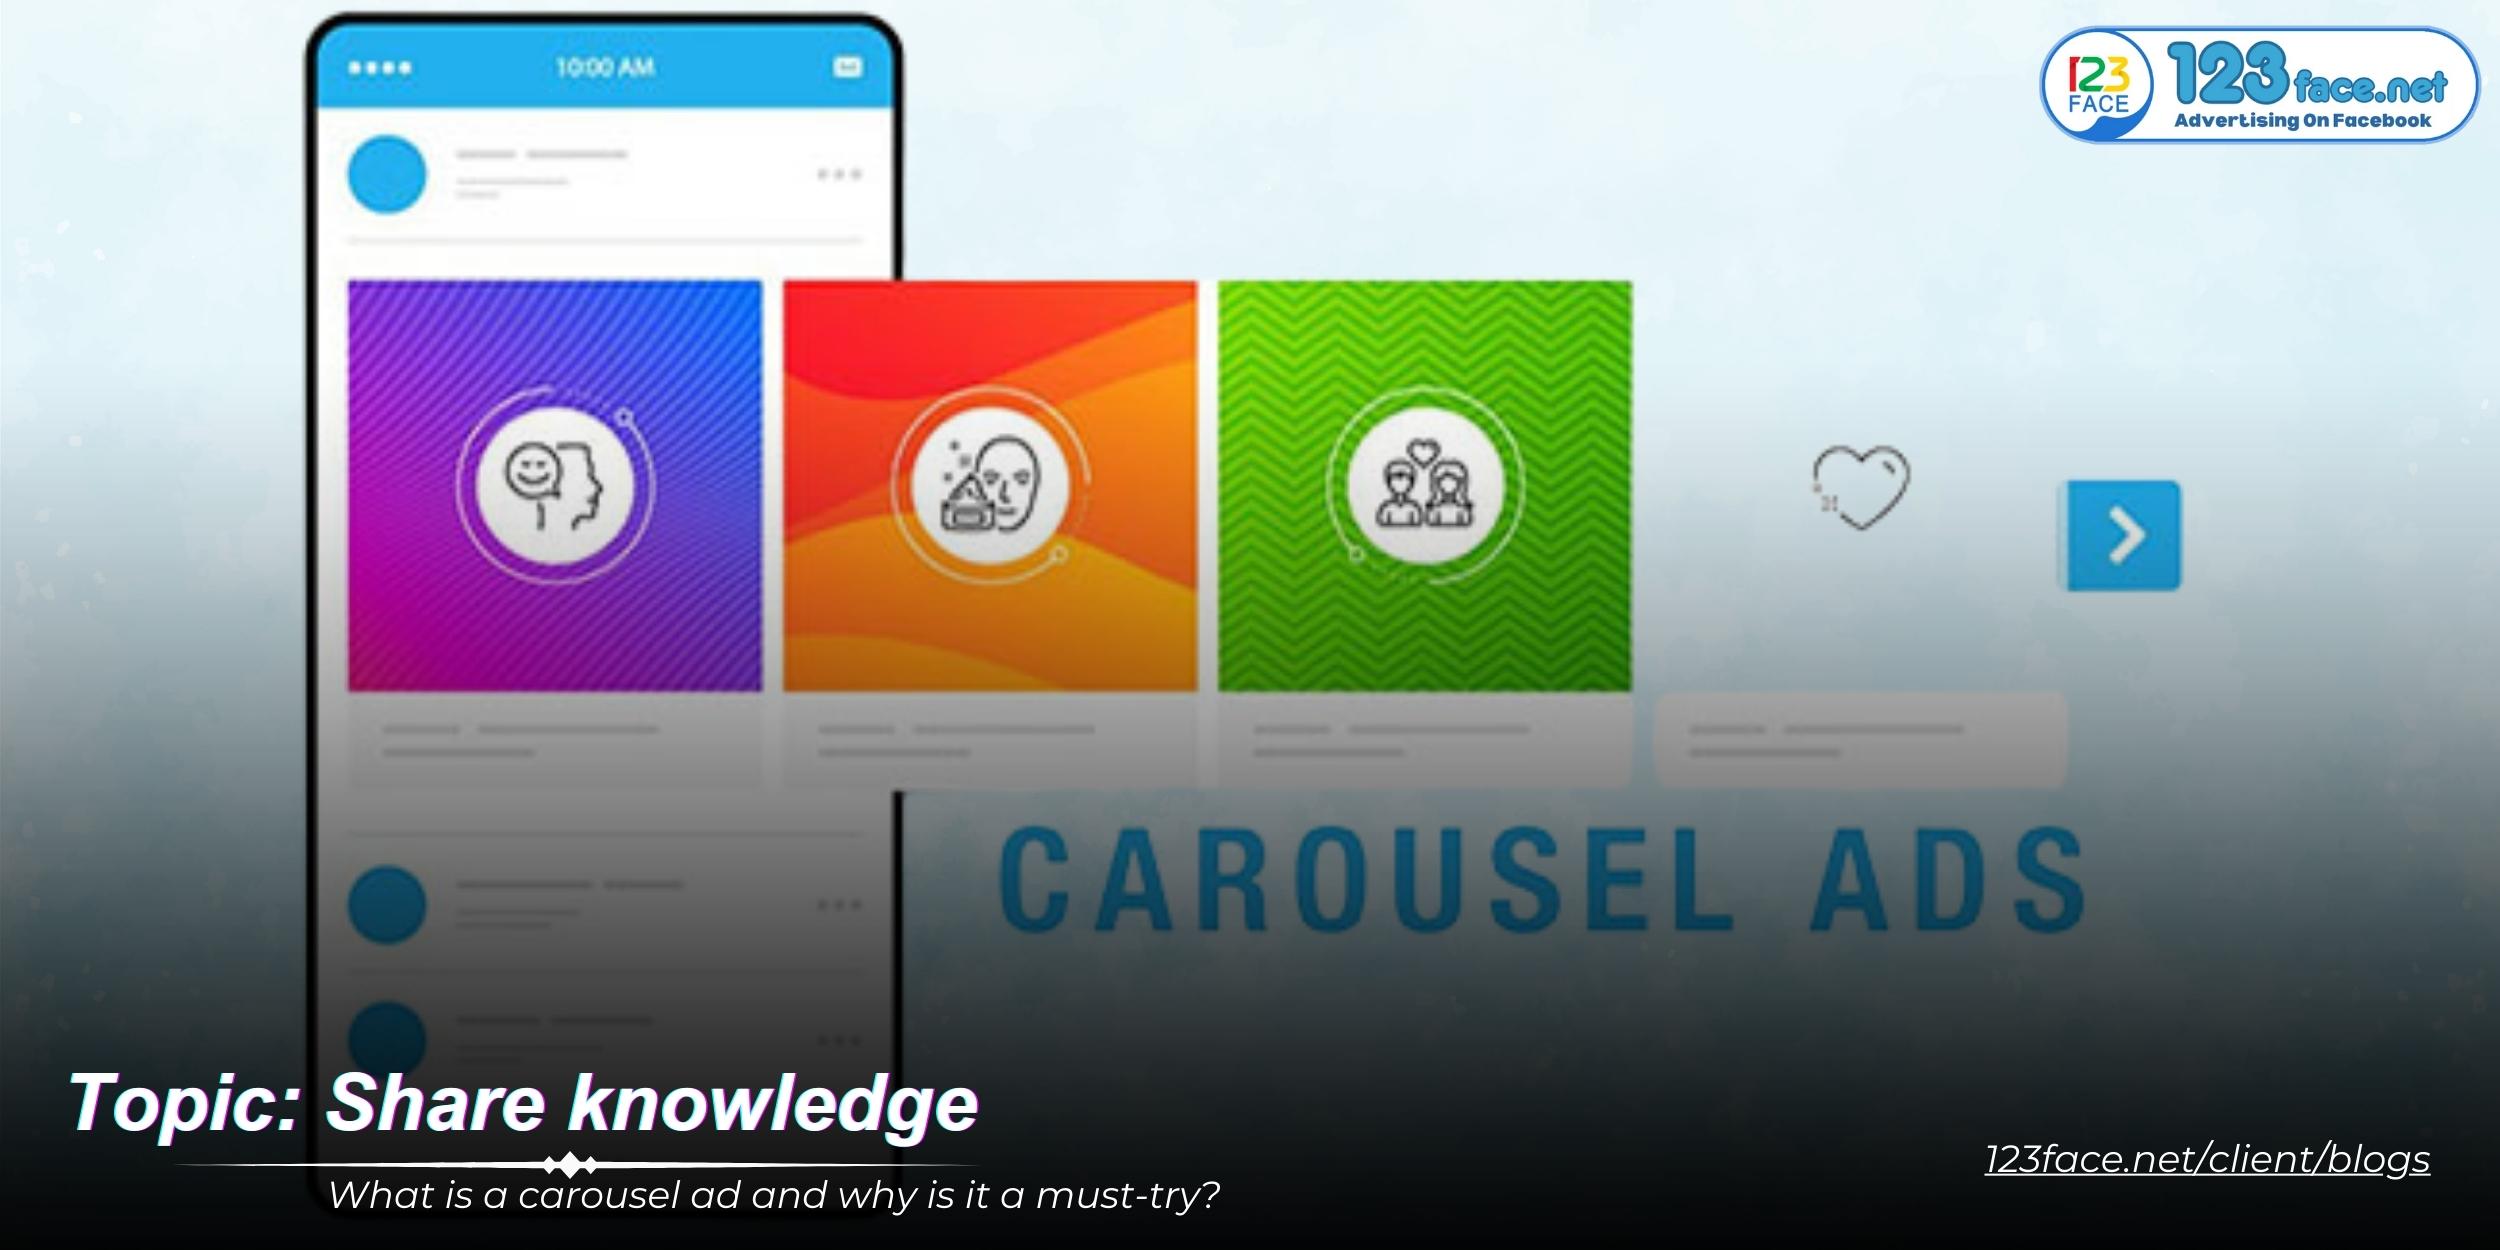 What is carousel advertising? Instructions for creating carousel ads